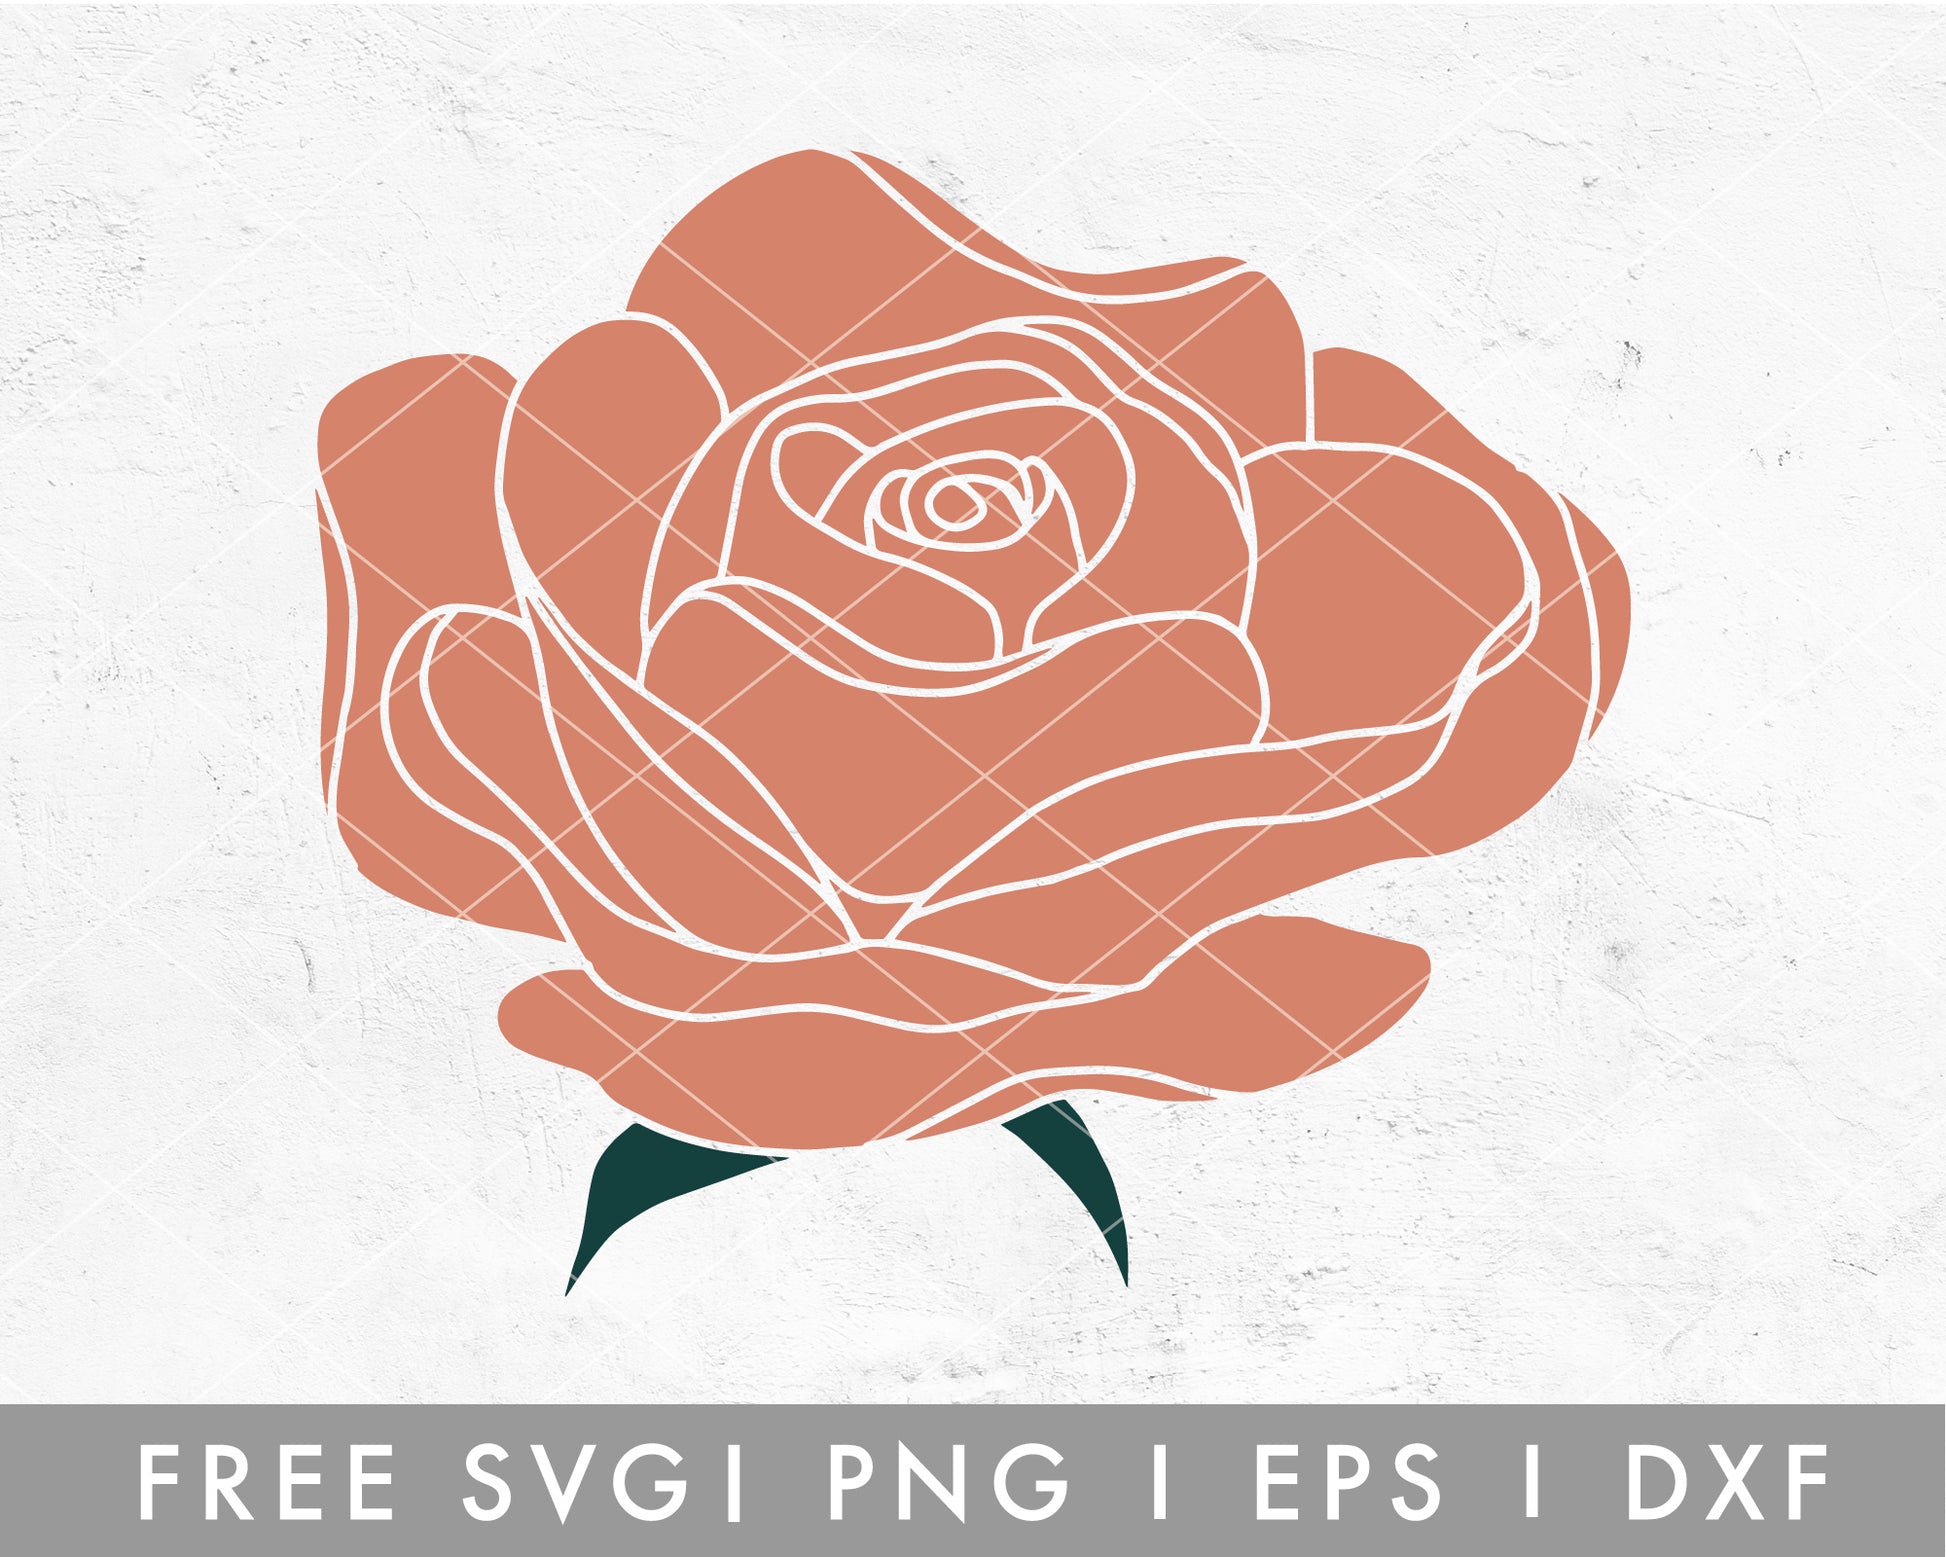 FREE Hand Drawn Rose SVG Cut File for Cricut, Cameo Silhouette